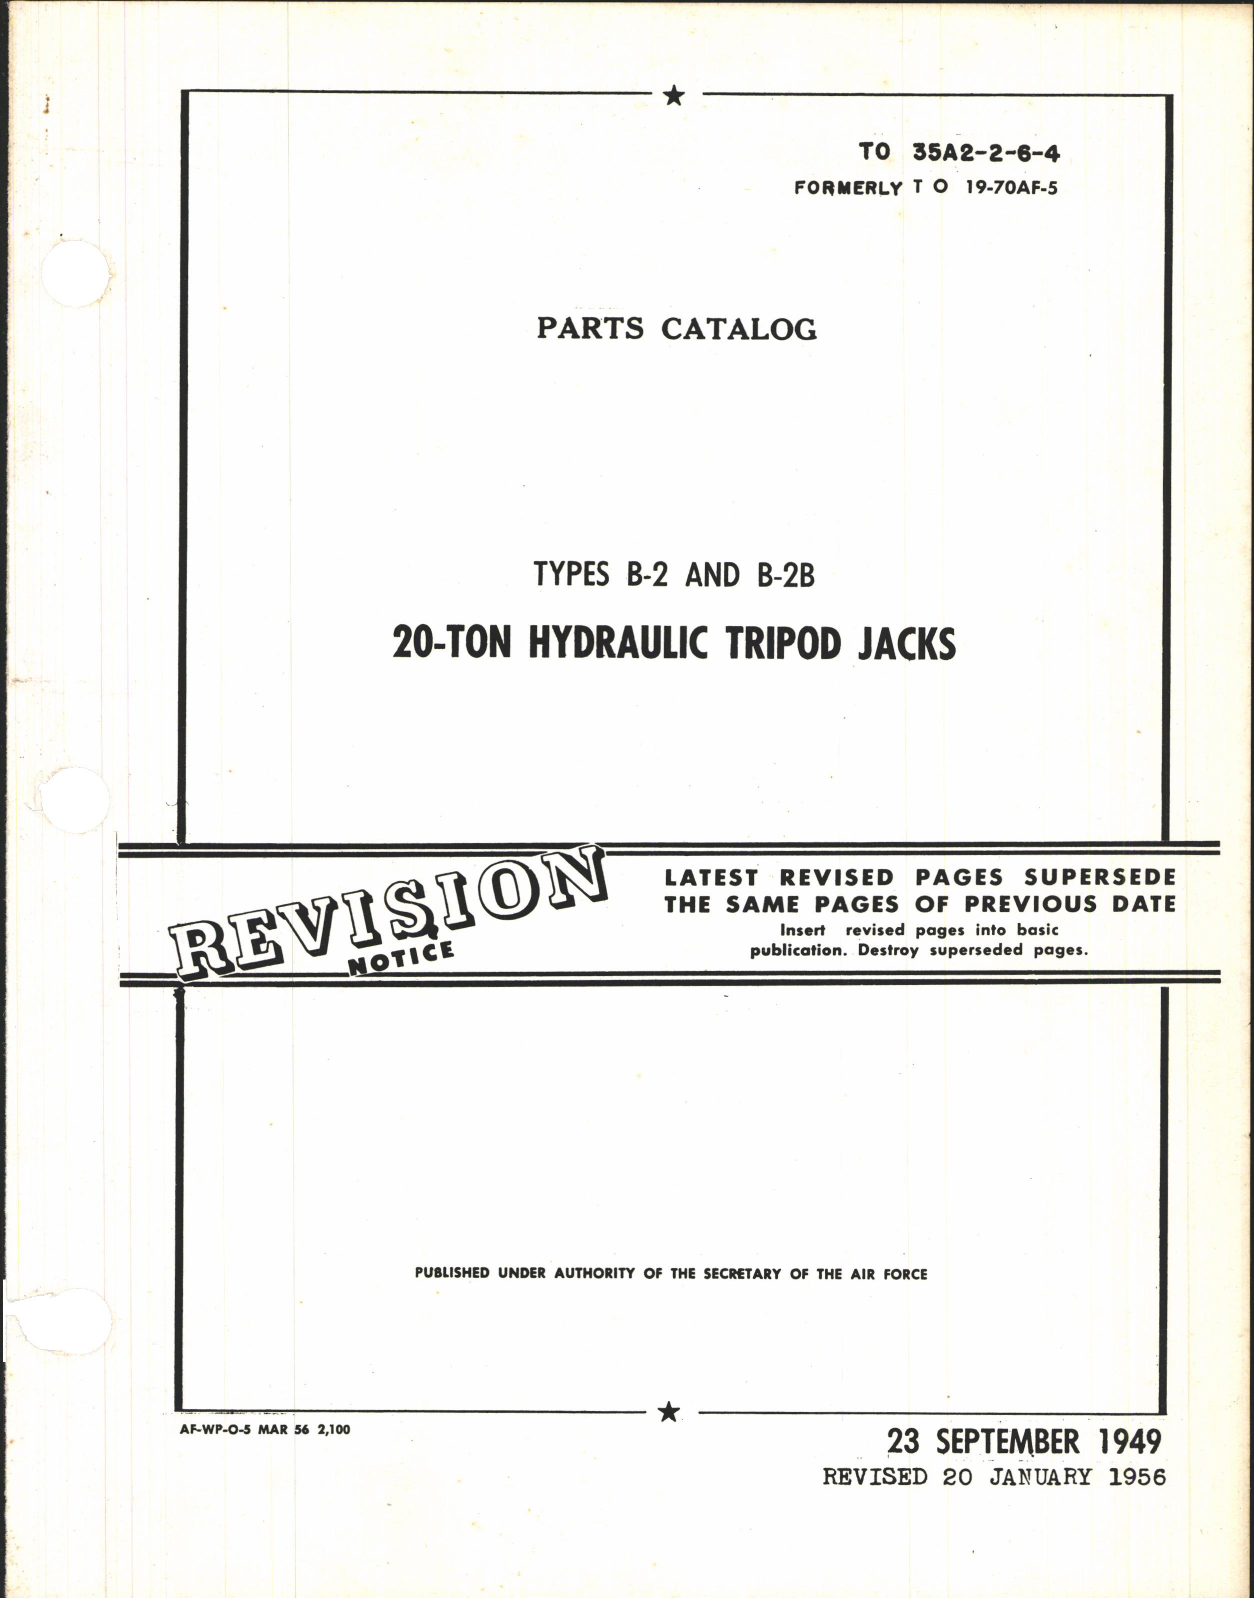 Sample page 1 from AirCorps Library document: Parts Catalog for Types B-2 and B-2B 20-Ton Hydraulic Tripod Jacks